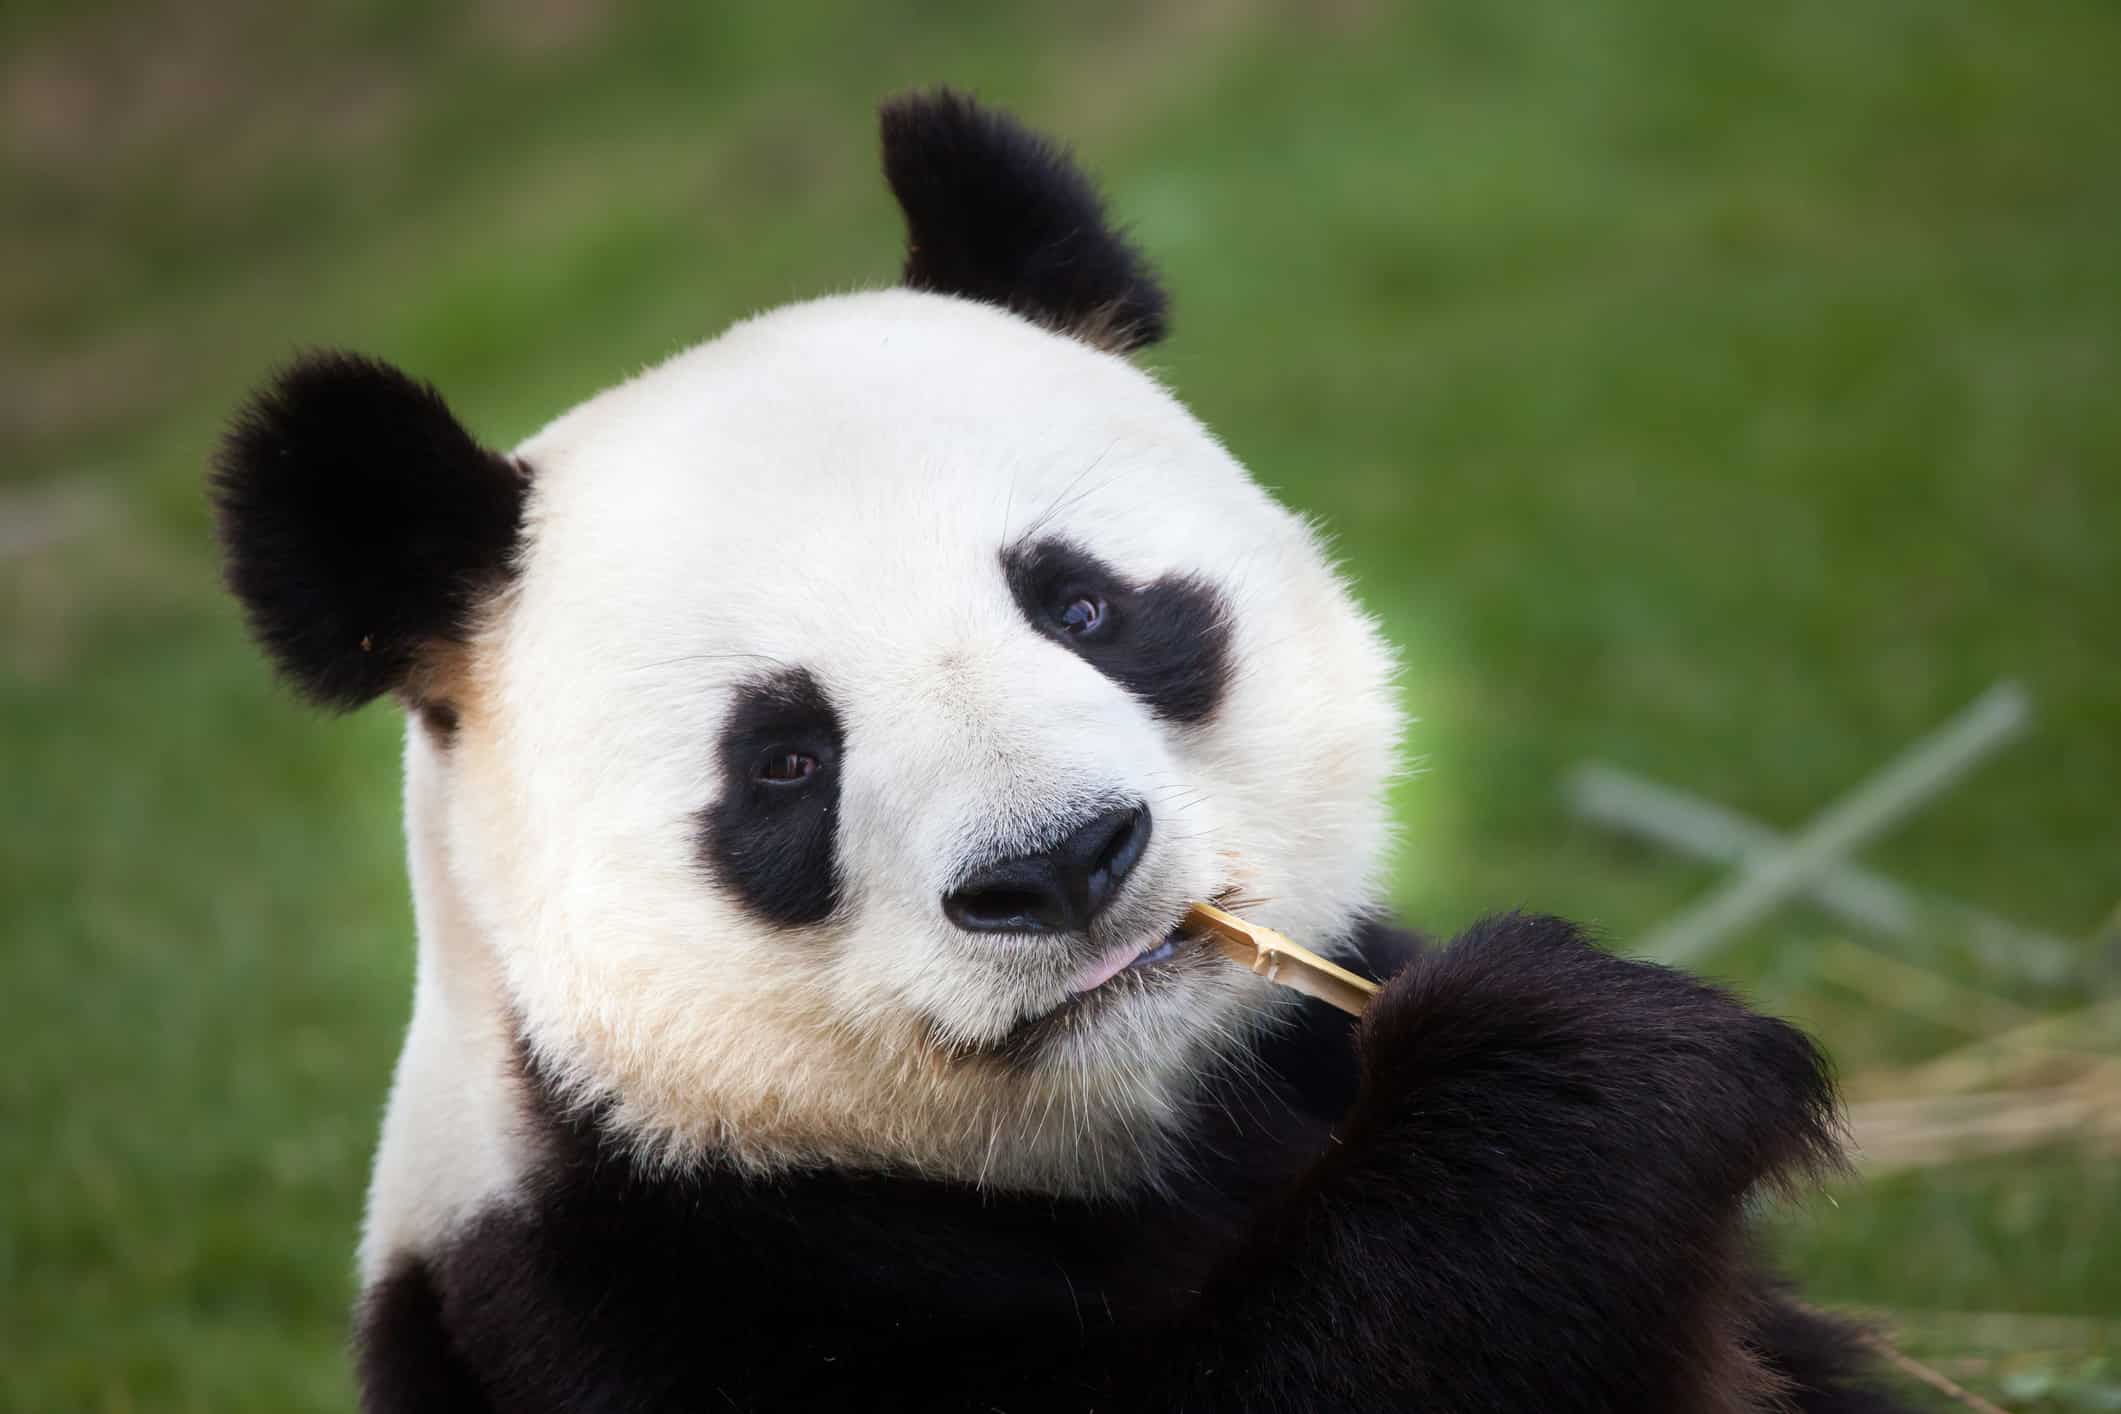 We discovered why giant pandas are black and white: here's how